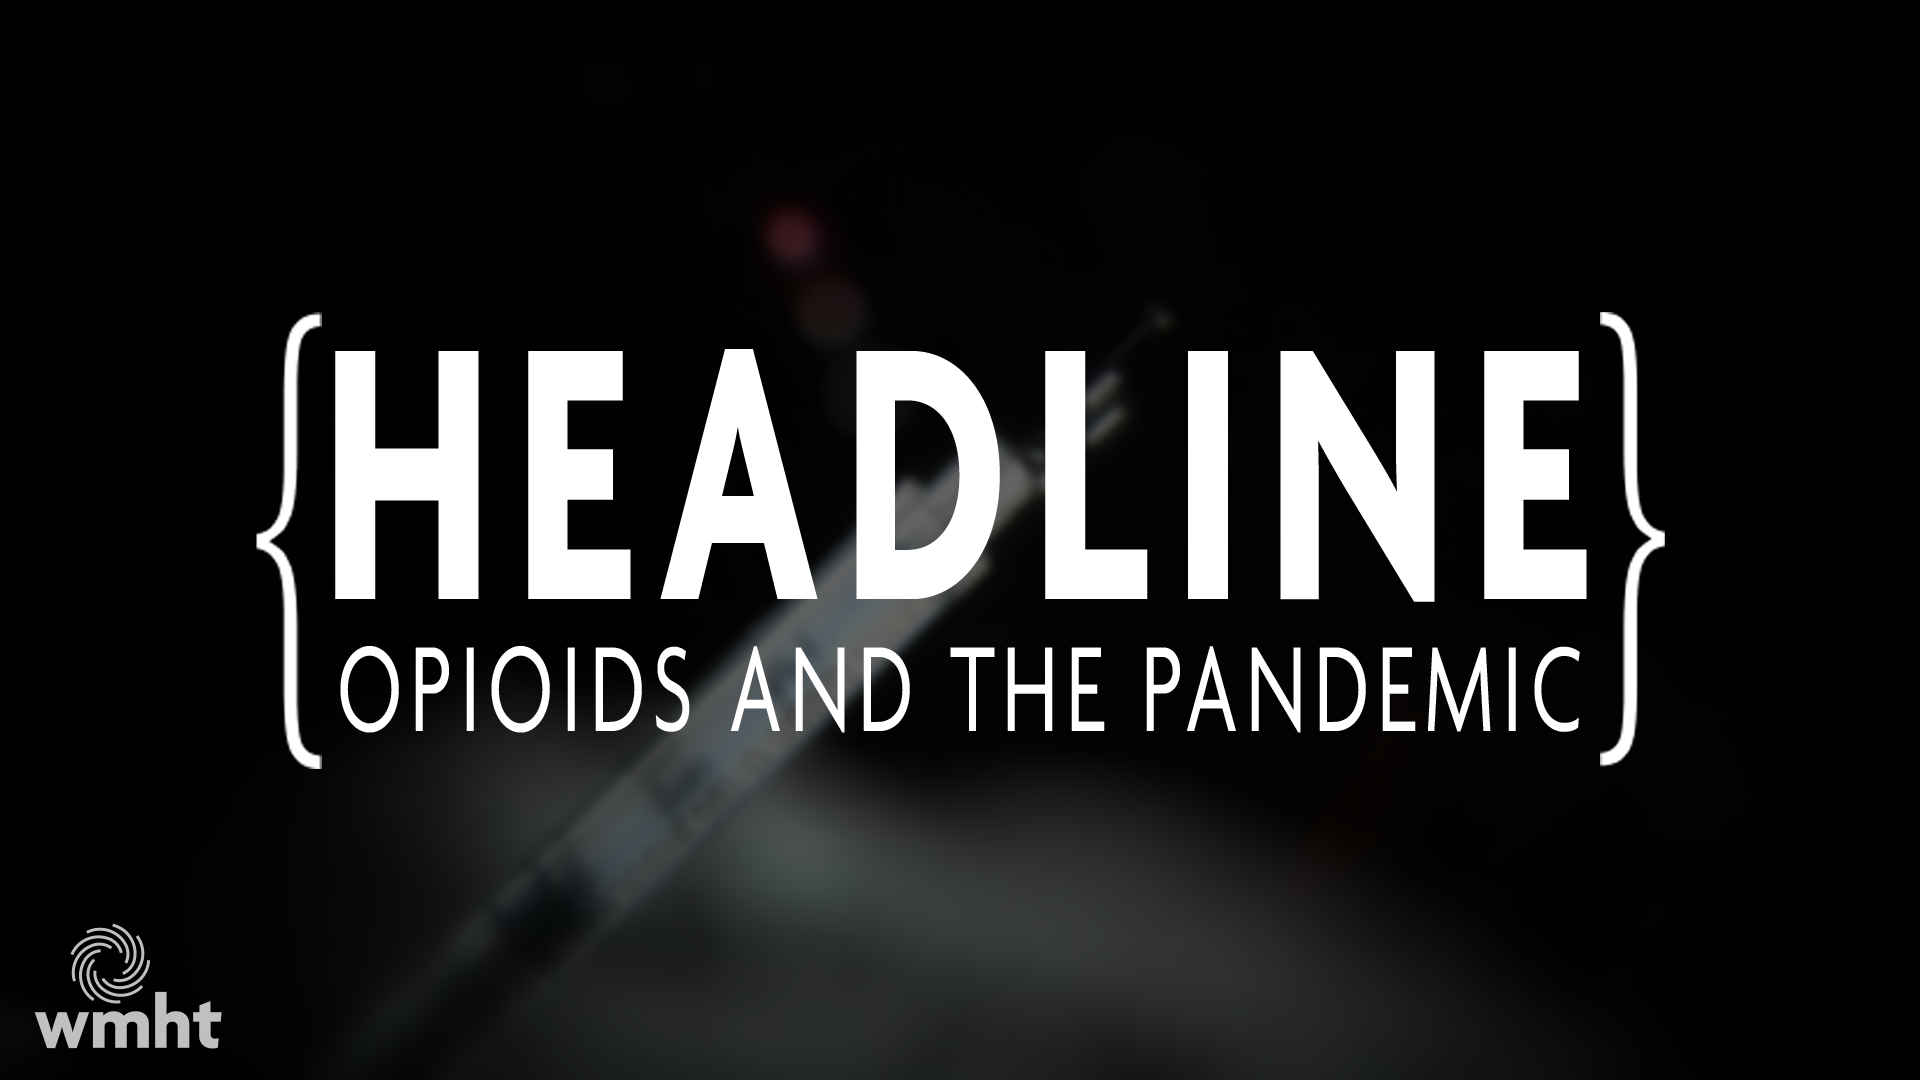 Opioids and the Pandemic